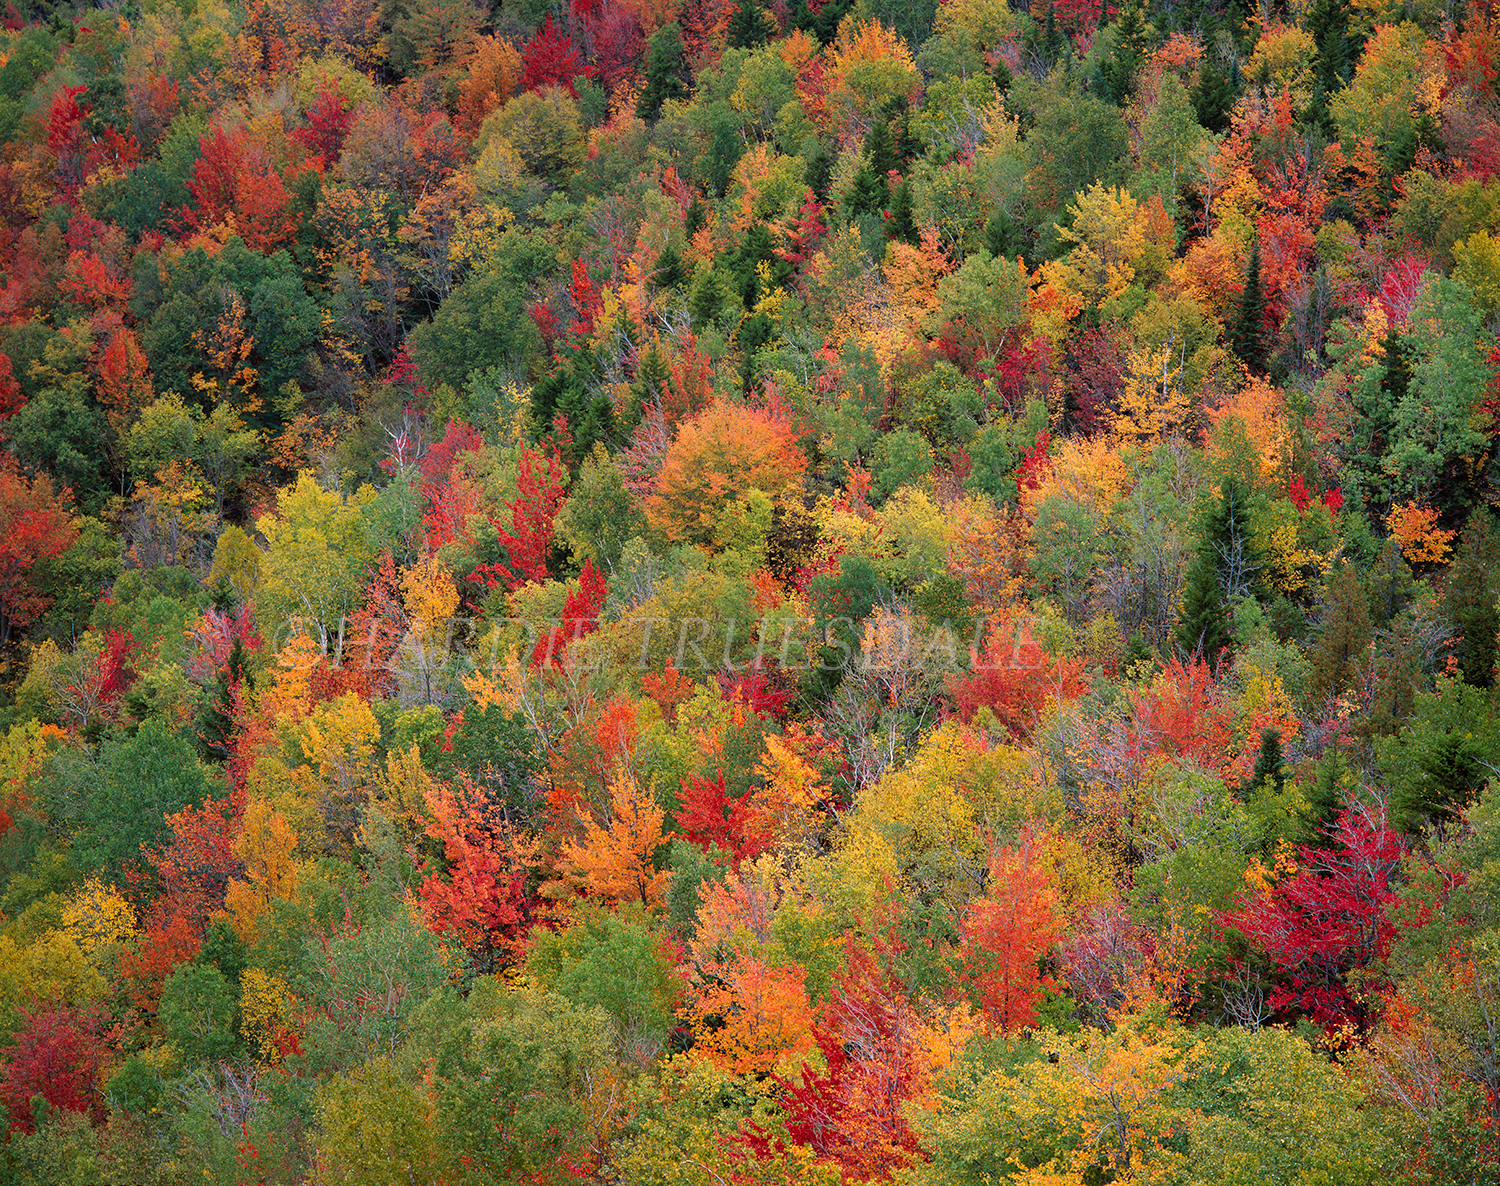 Adk#36a "Painted Fall"